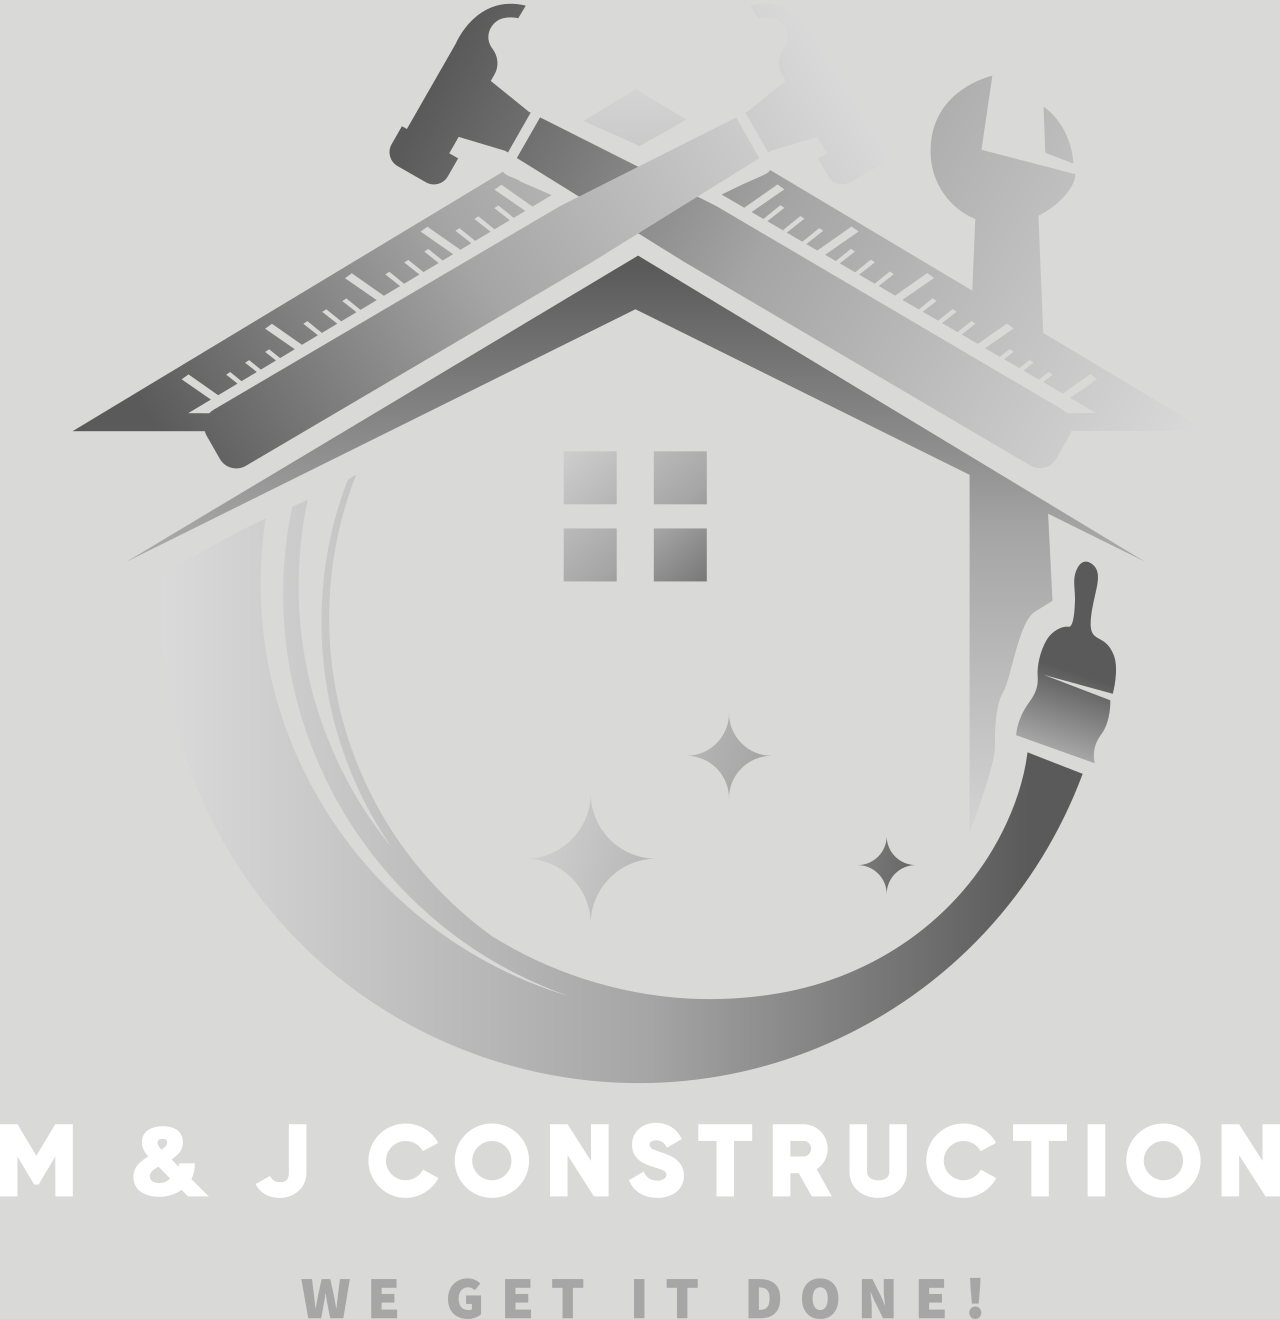 M & J Construction, Quality Residential, Commercial Services's logo